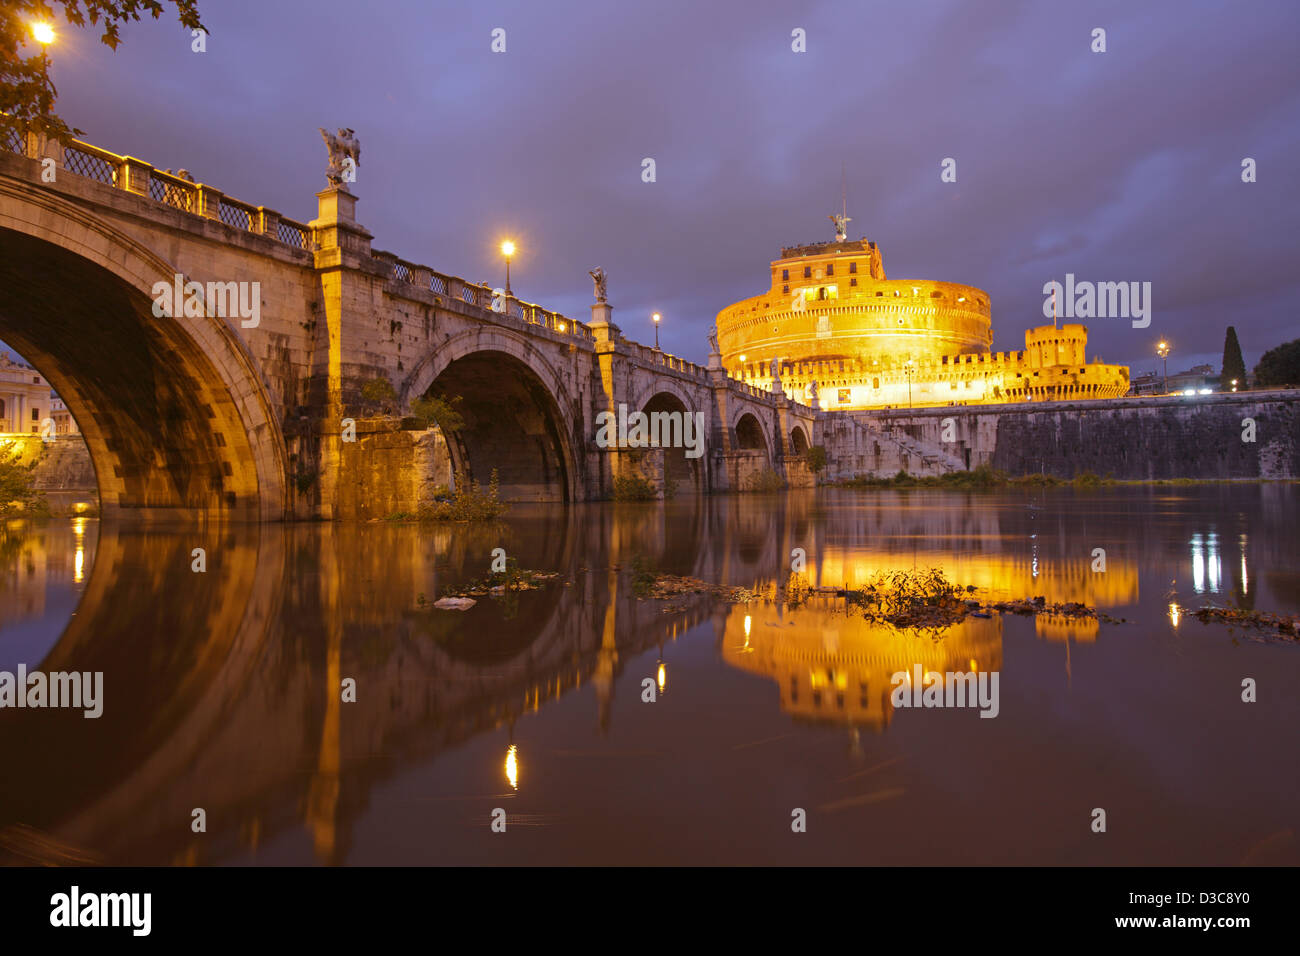 Castel Sant'Angelo (Mausoleum of Hadrian), reflected in the Tevere river, Rome, Italy Stock Photo